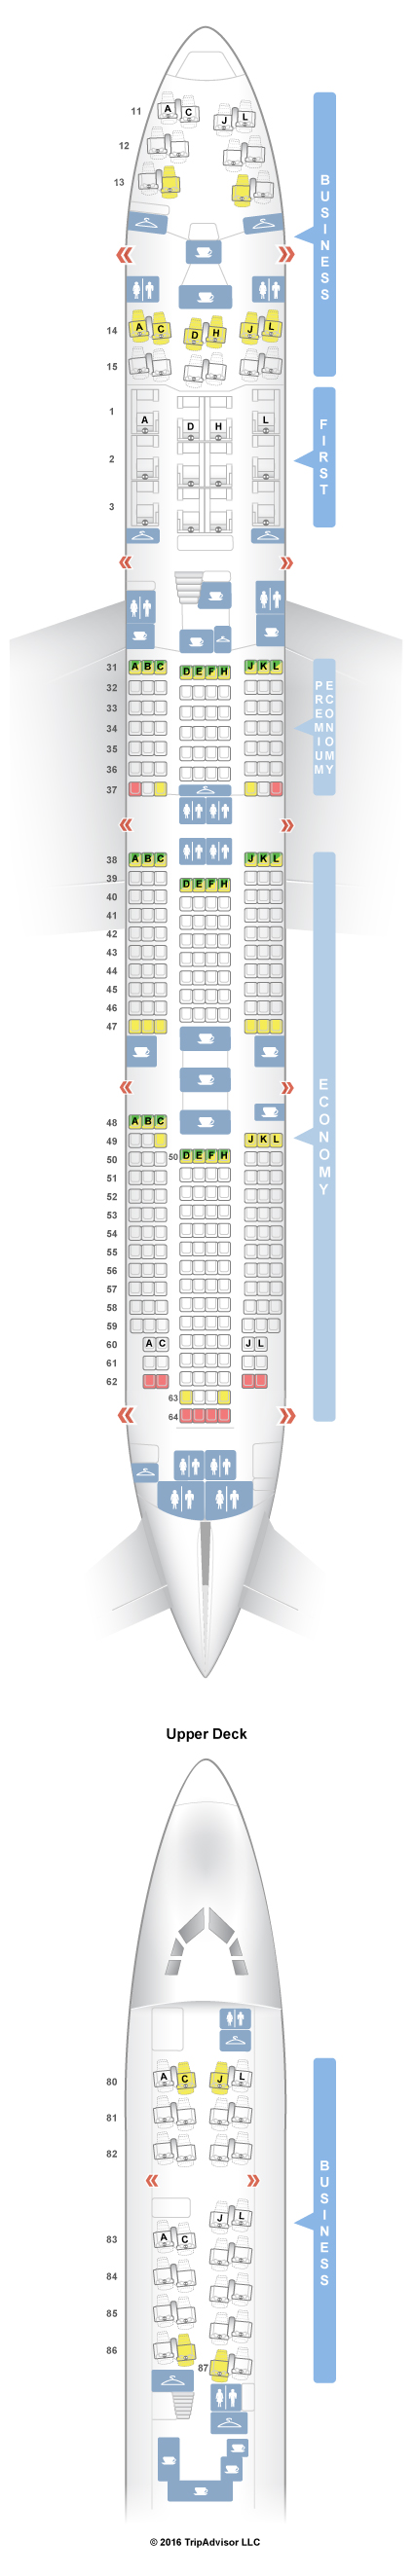 Boeing 747 8 Intercontinental Seating Chart